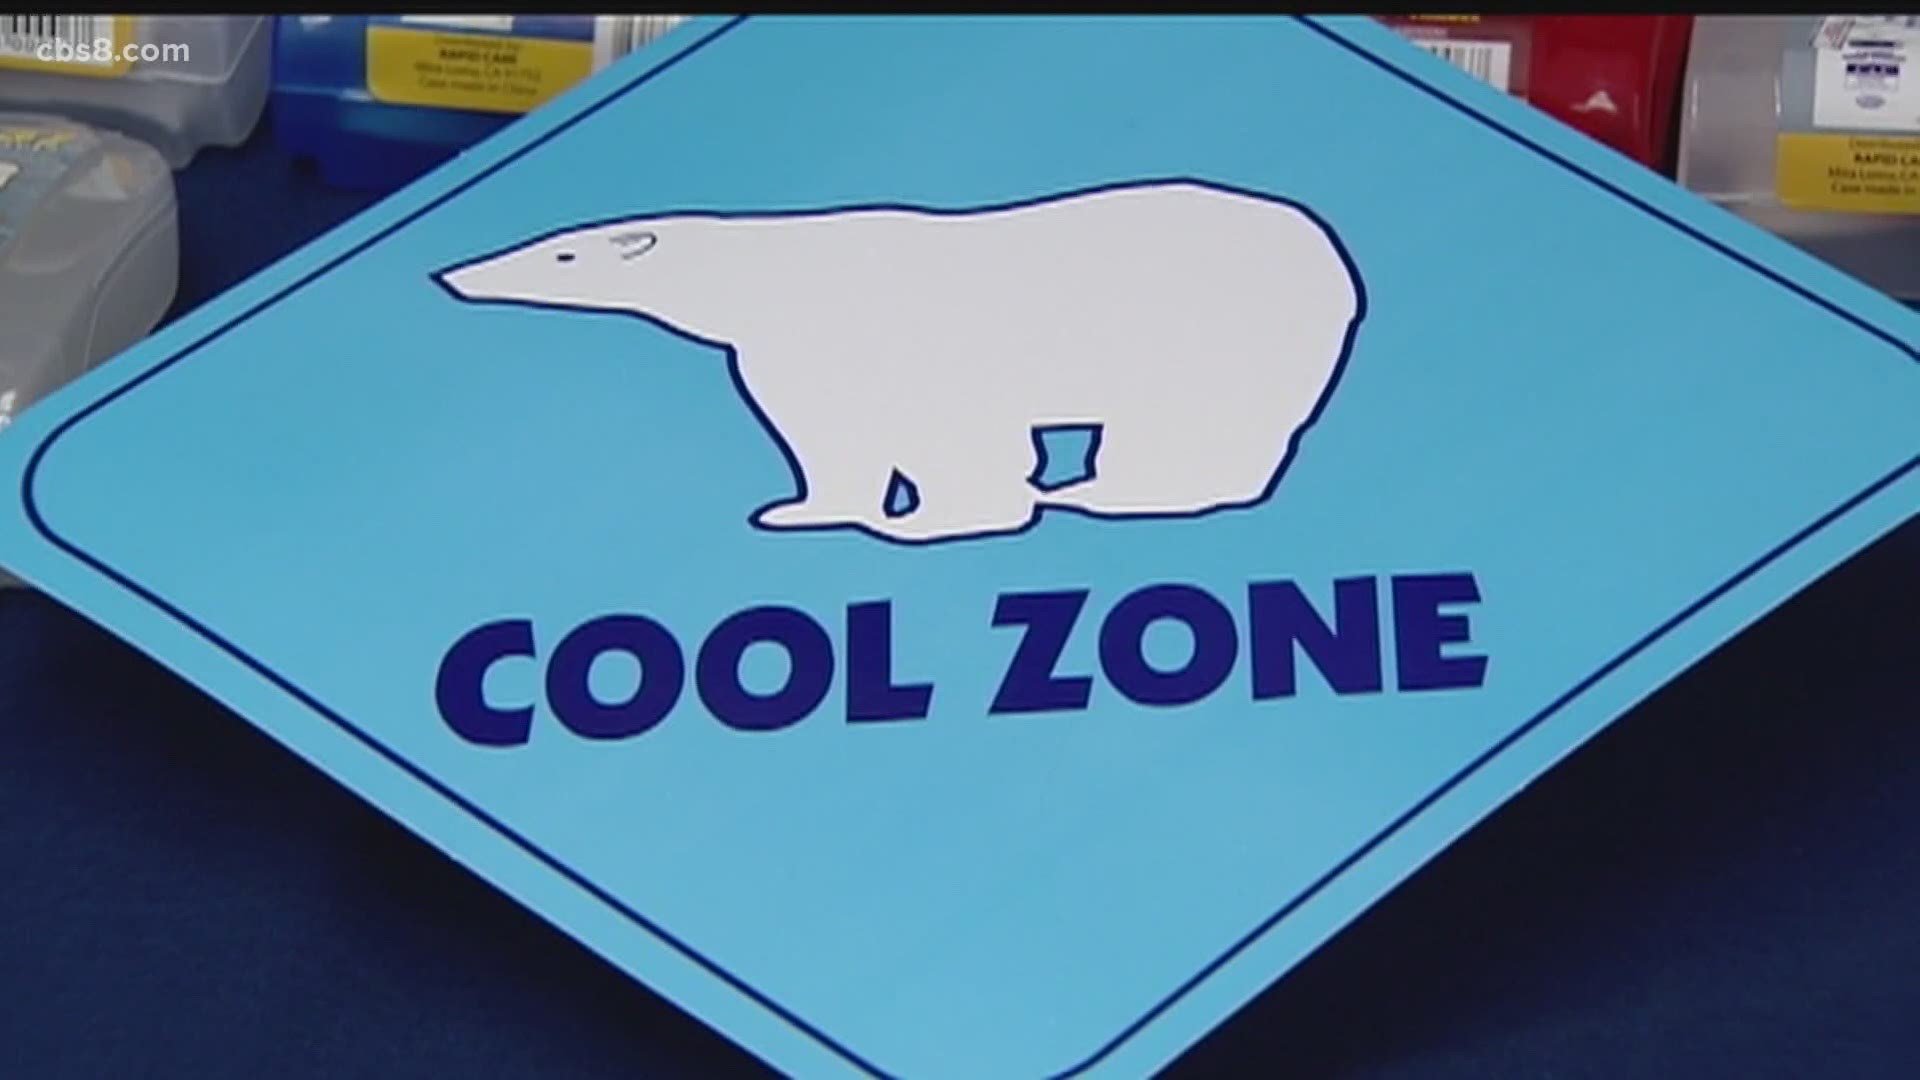 Seven "cool zones" opened at noon Monday in San Diego County to provide relief from high temperatures.